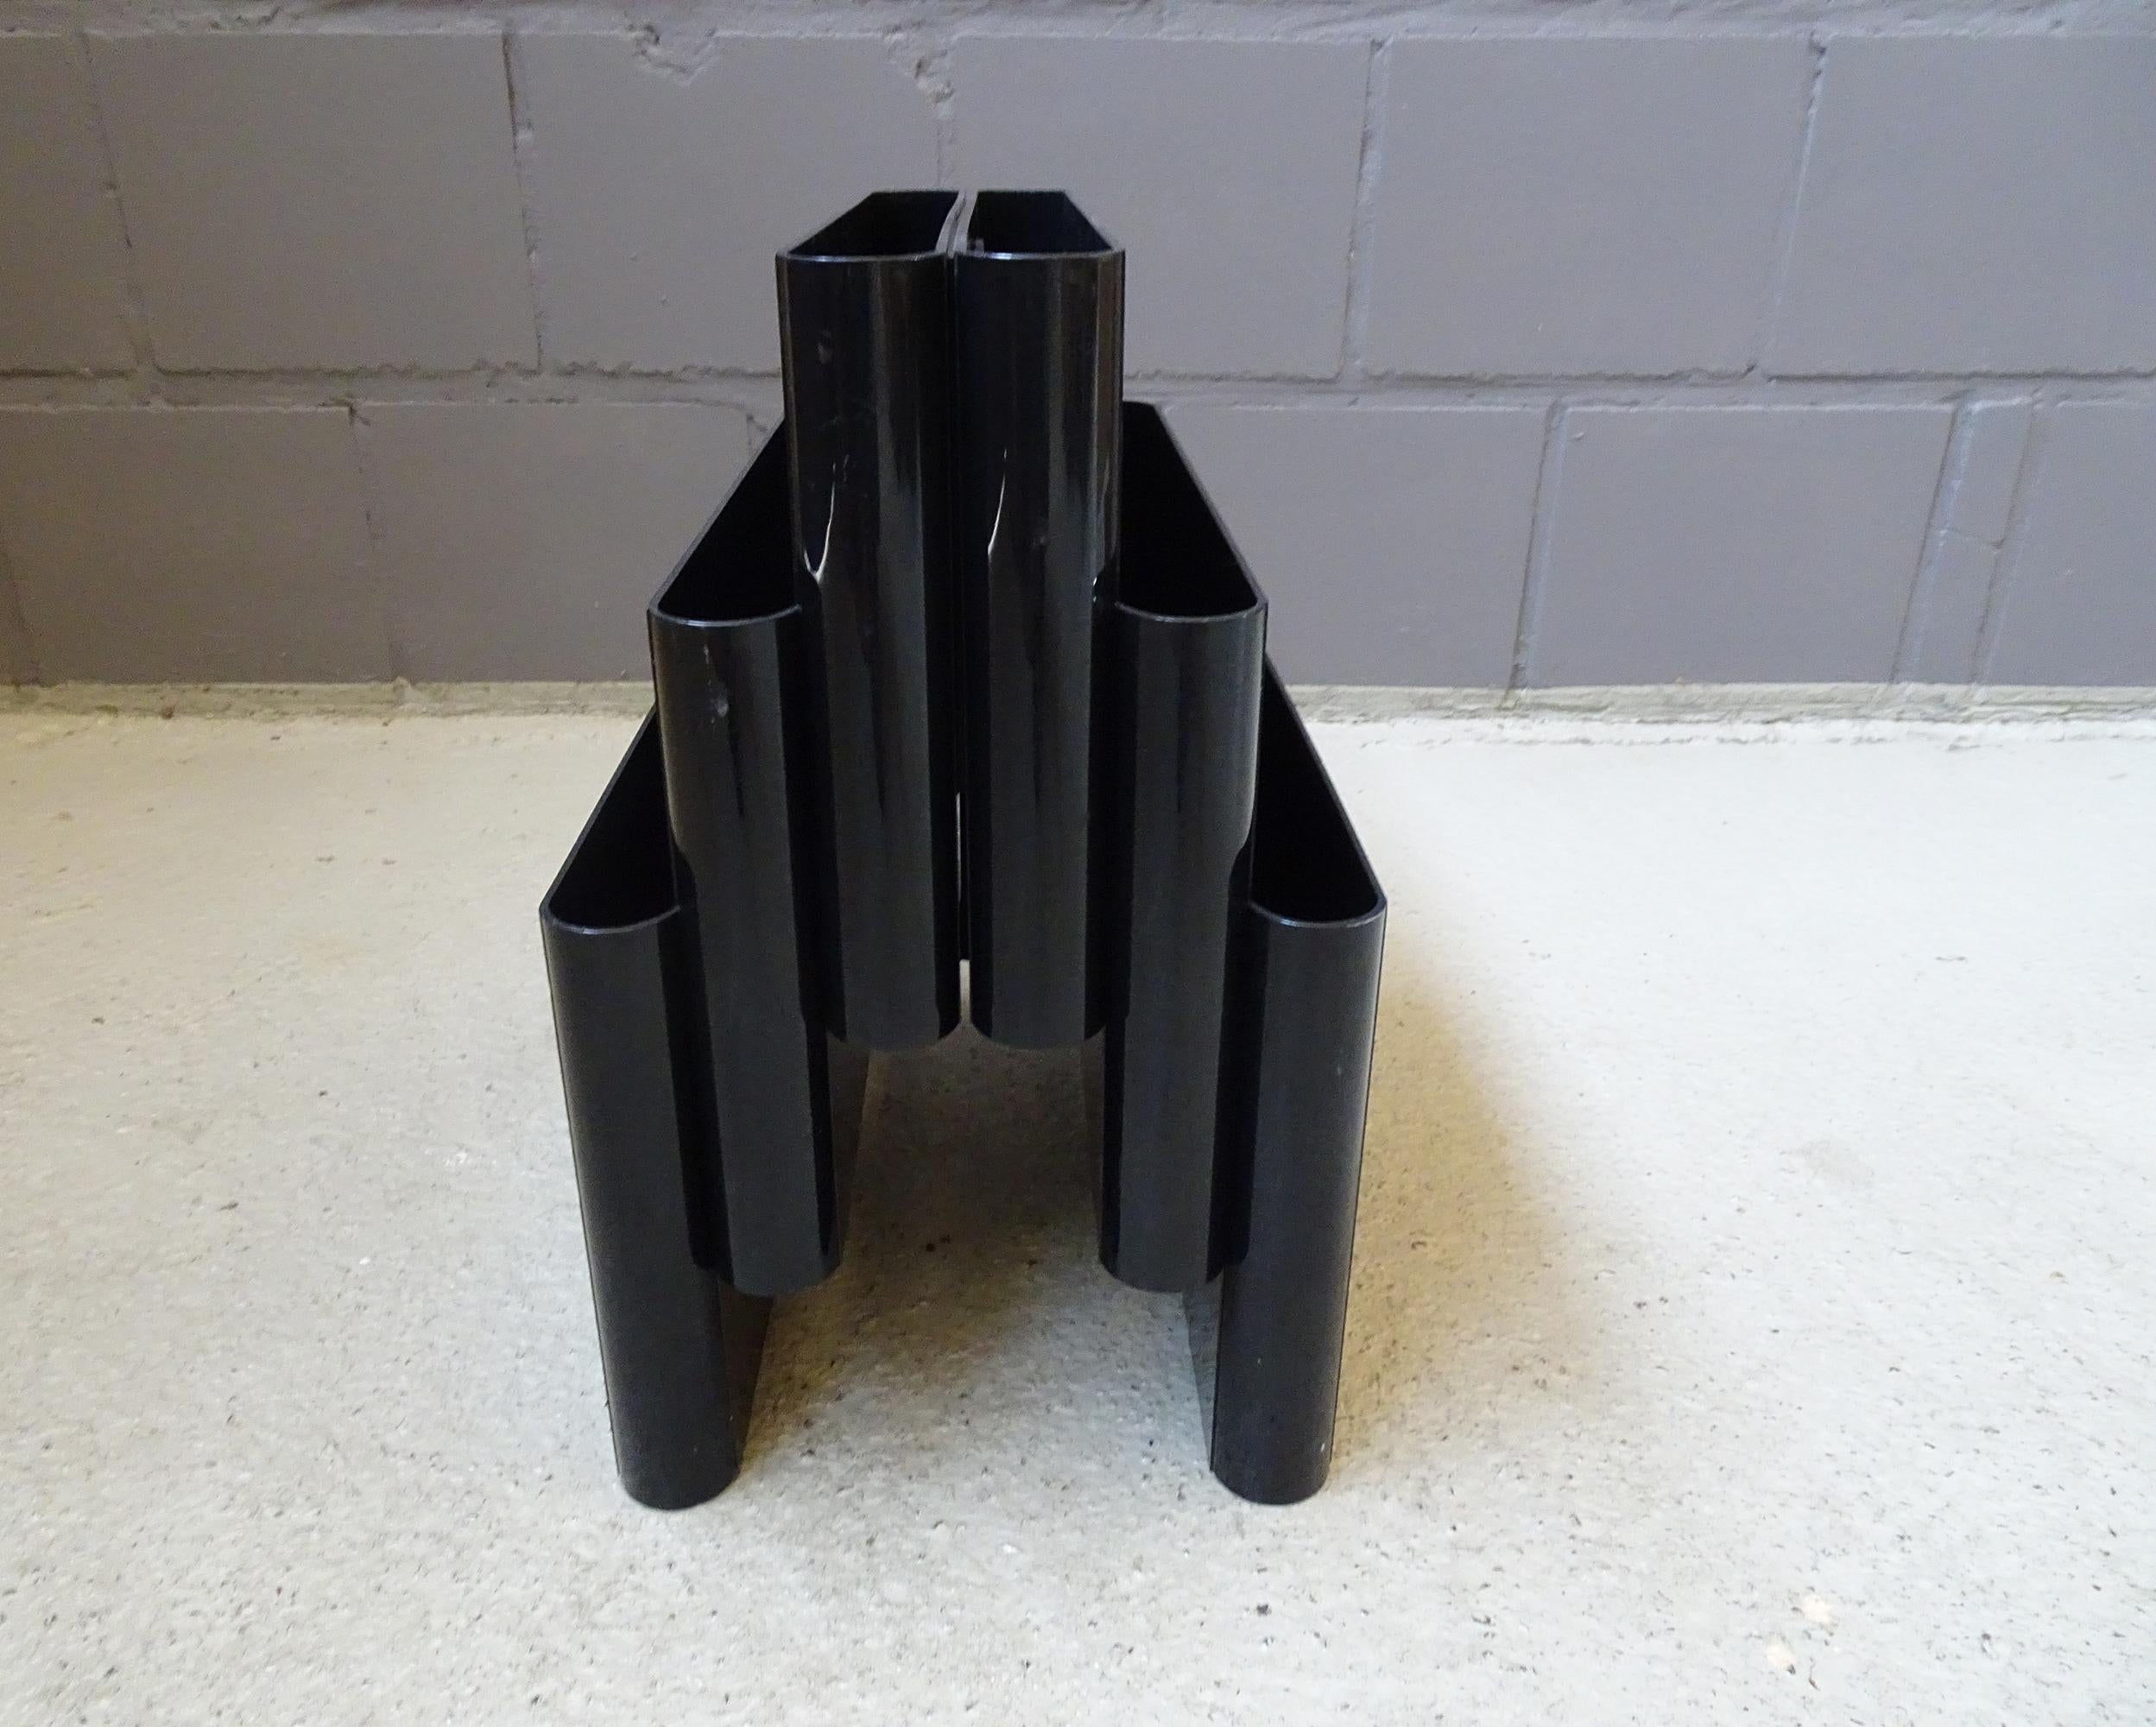 Large magazine rack by Kartell, design Giotto Stoppino. A minimalist black plastic magazine rack from the 1970s. This version is extra large with six storage compartments. There is a practical handle in the middle.

A timeless Italian design